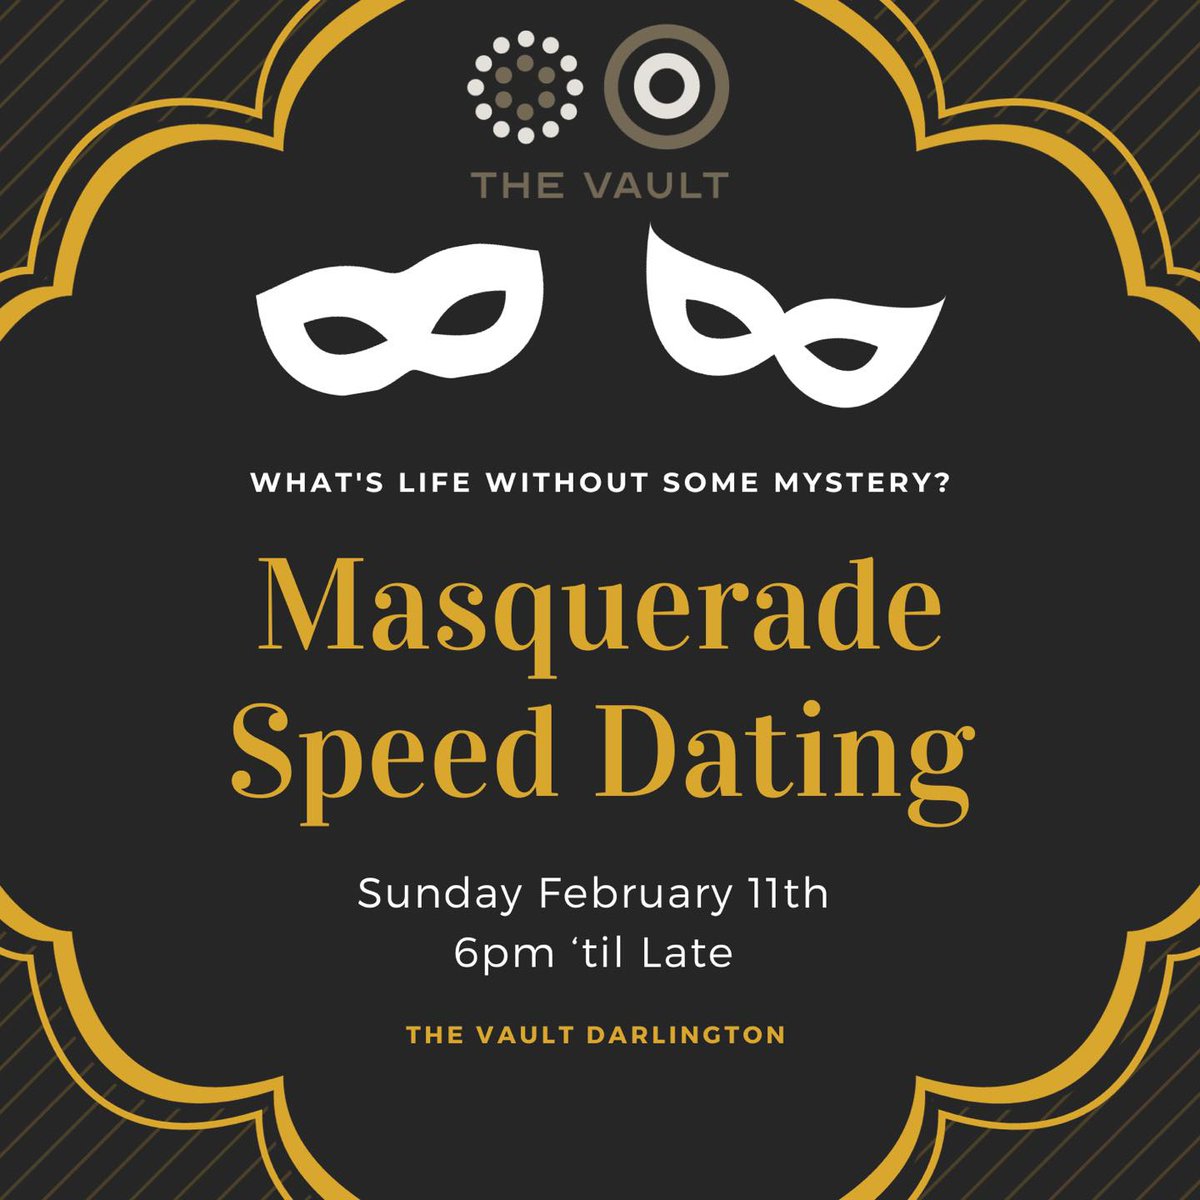 💋 𝗧𝗛𝗘 𝗩𝗔𝗨𝗟𝗧: 𝗦𝗣𝗘𝗘𝗗 𝗗𝗔𝗧𝗜𝗡𝗚 𝗘𝗫𝗧𝗥𝗔𝗩𝗔𝗚𝗔𝗡𝗭𝗔 📅 Sunday 11th February 🕕 6pm 💏 Join The Vault for a roaring twenties-style speed dating event to kick off the pre-Valentine's celebration in style 🎟️ Limited FREE tickets are available from Eventbrite